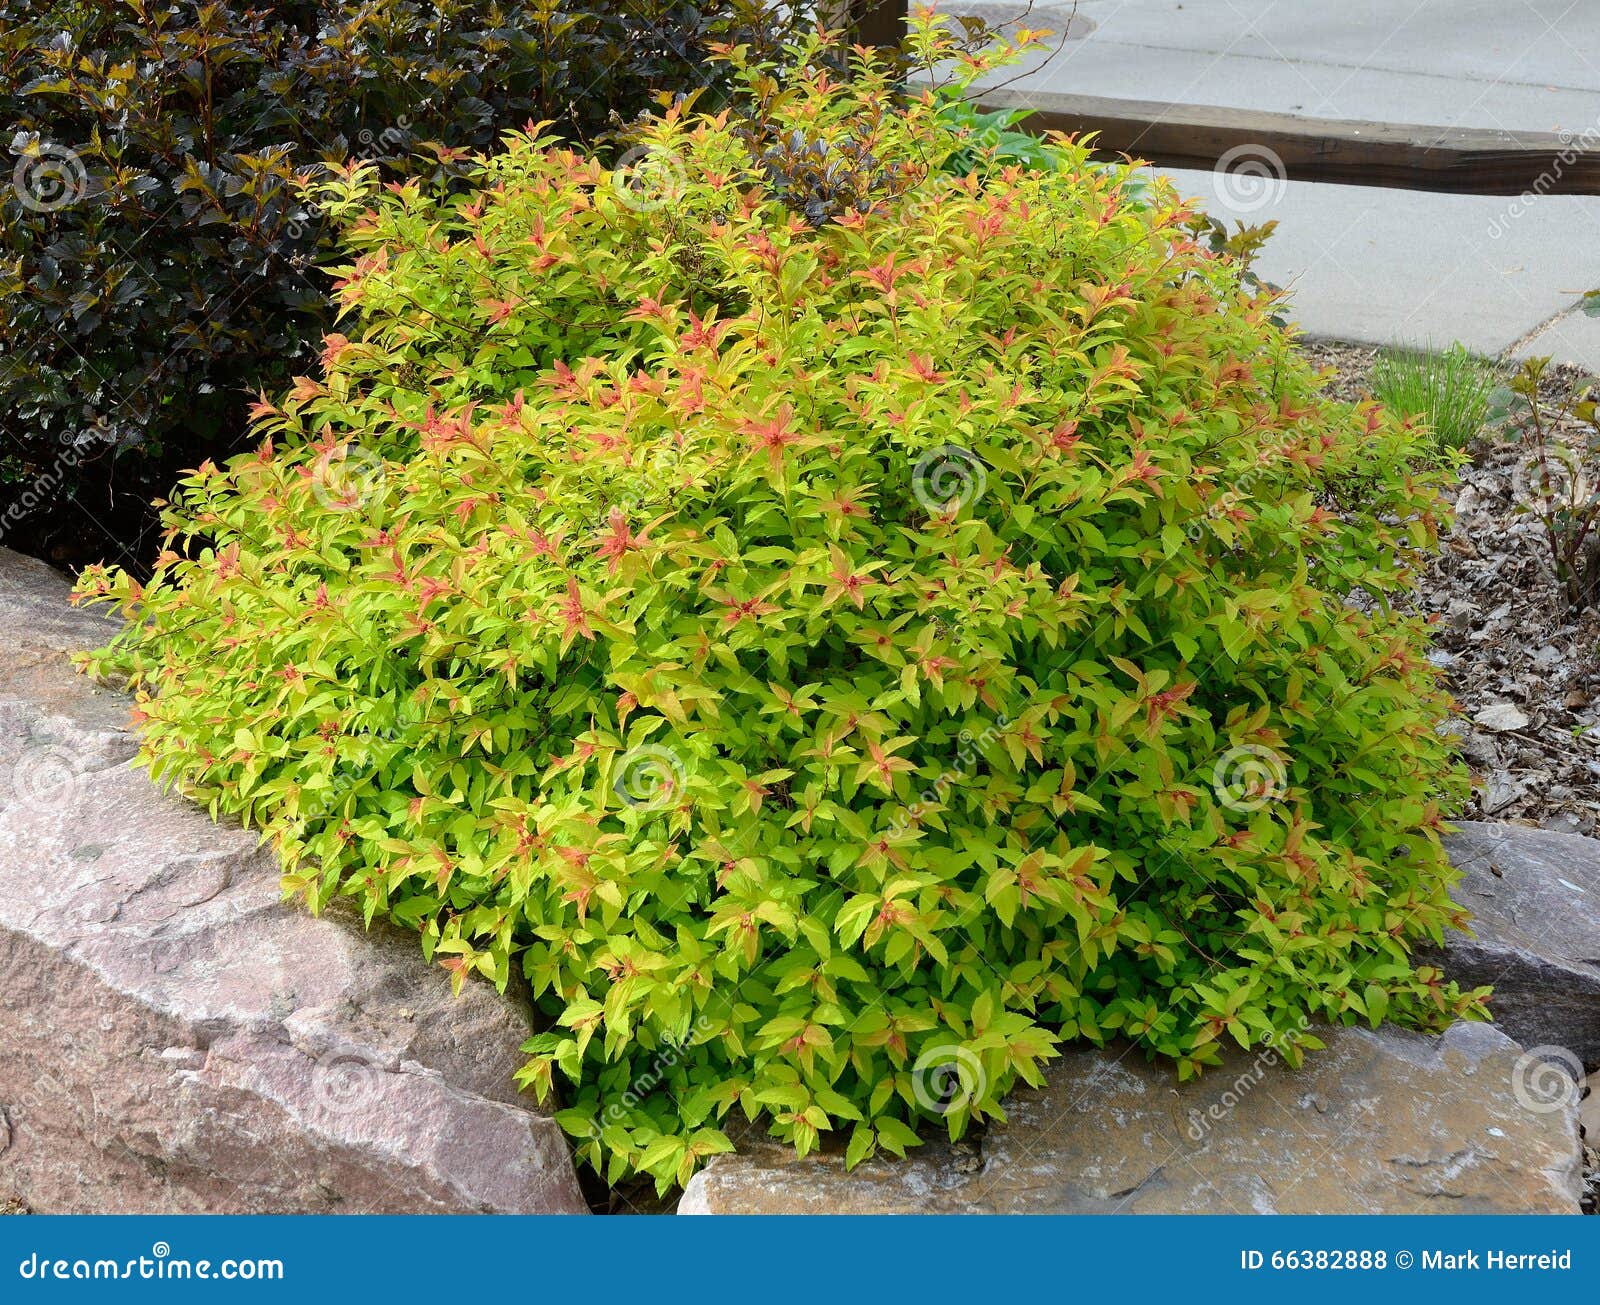 https://thumbs.dreamstime.com/z/goldflame-spirea-landscaping-shrub-compact-mounded-deciduous-66382888.jpg